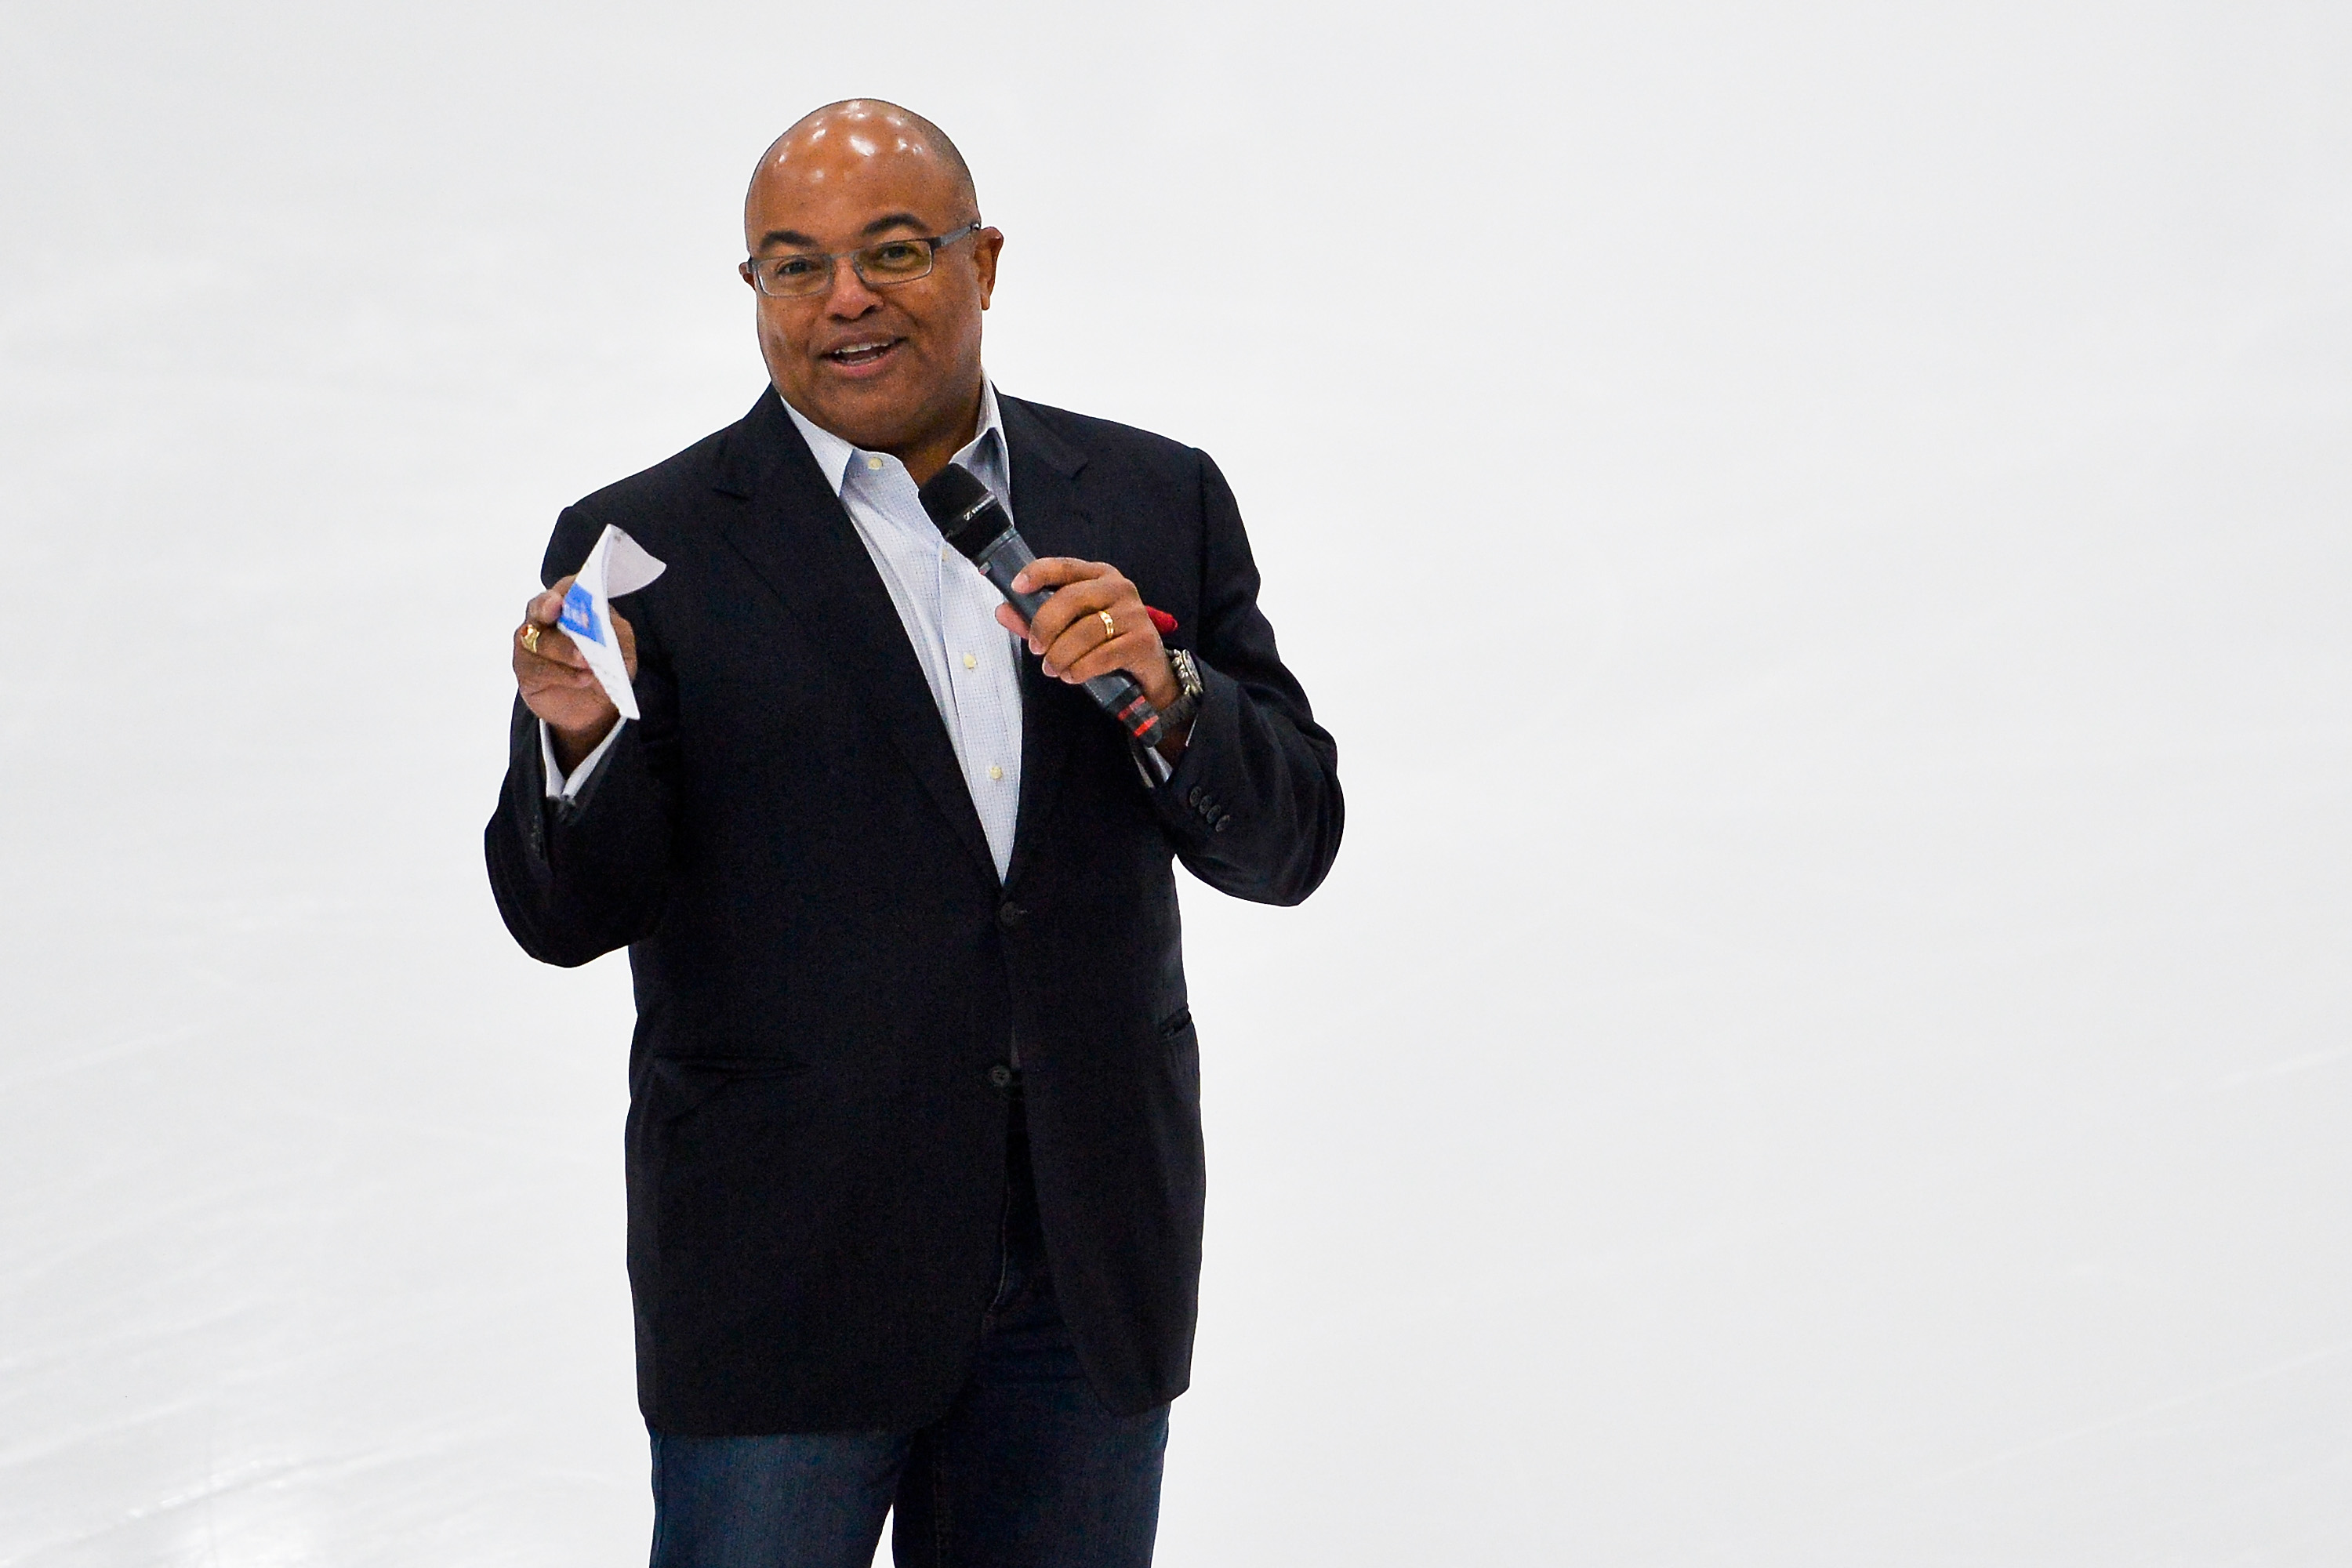 Why did Mike Tirico always carry a spoon while growing up?